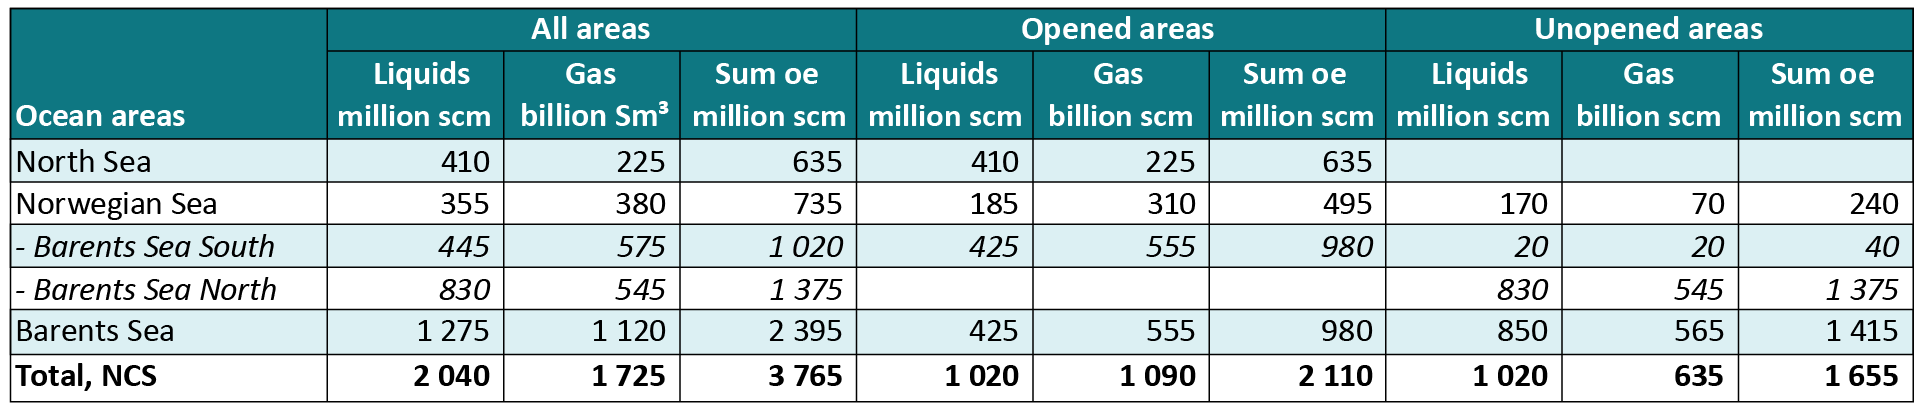 The table shows Undiscovered resources by sea area, in opened and unopened areas.